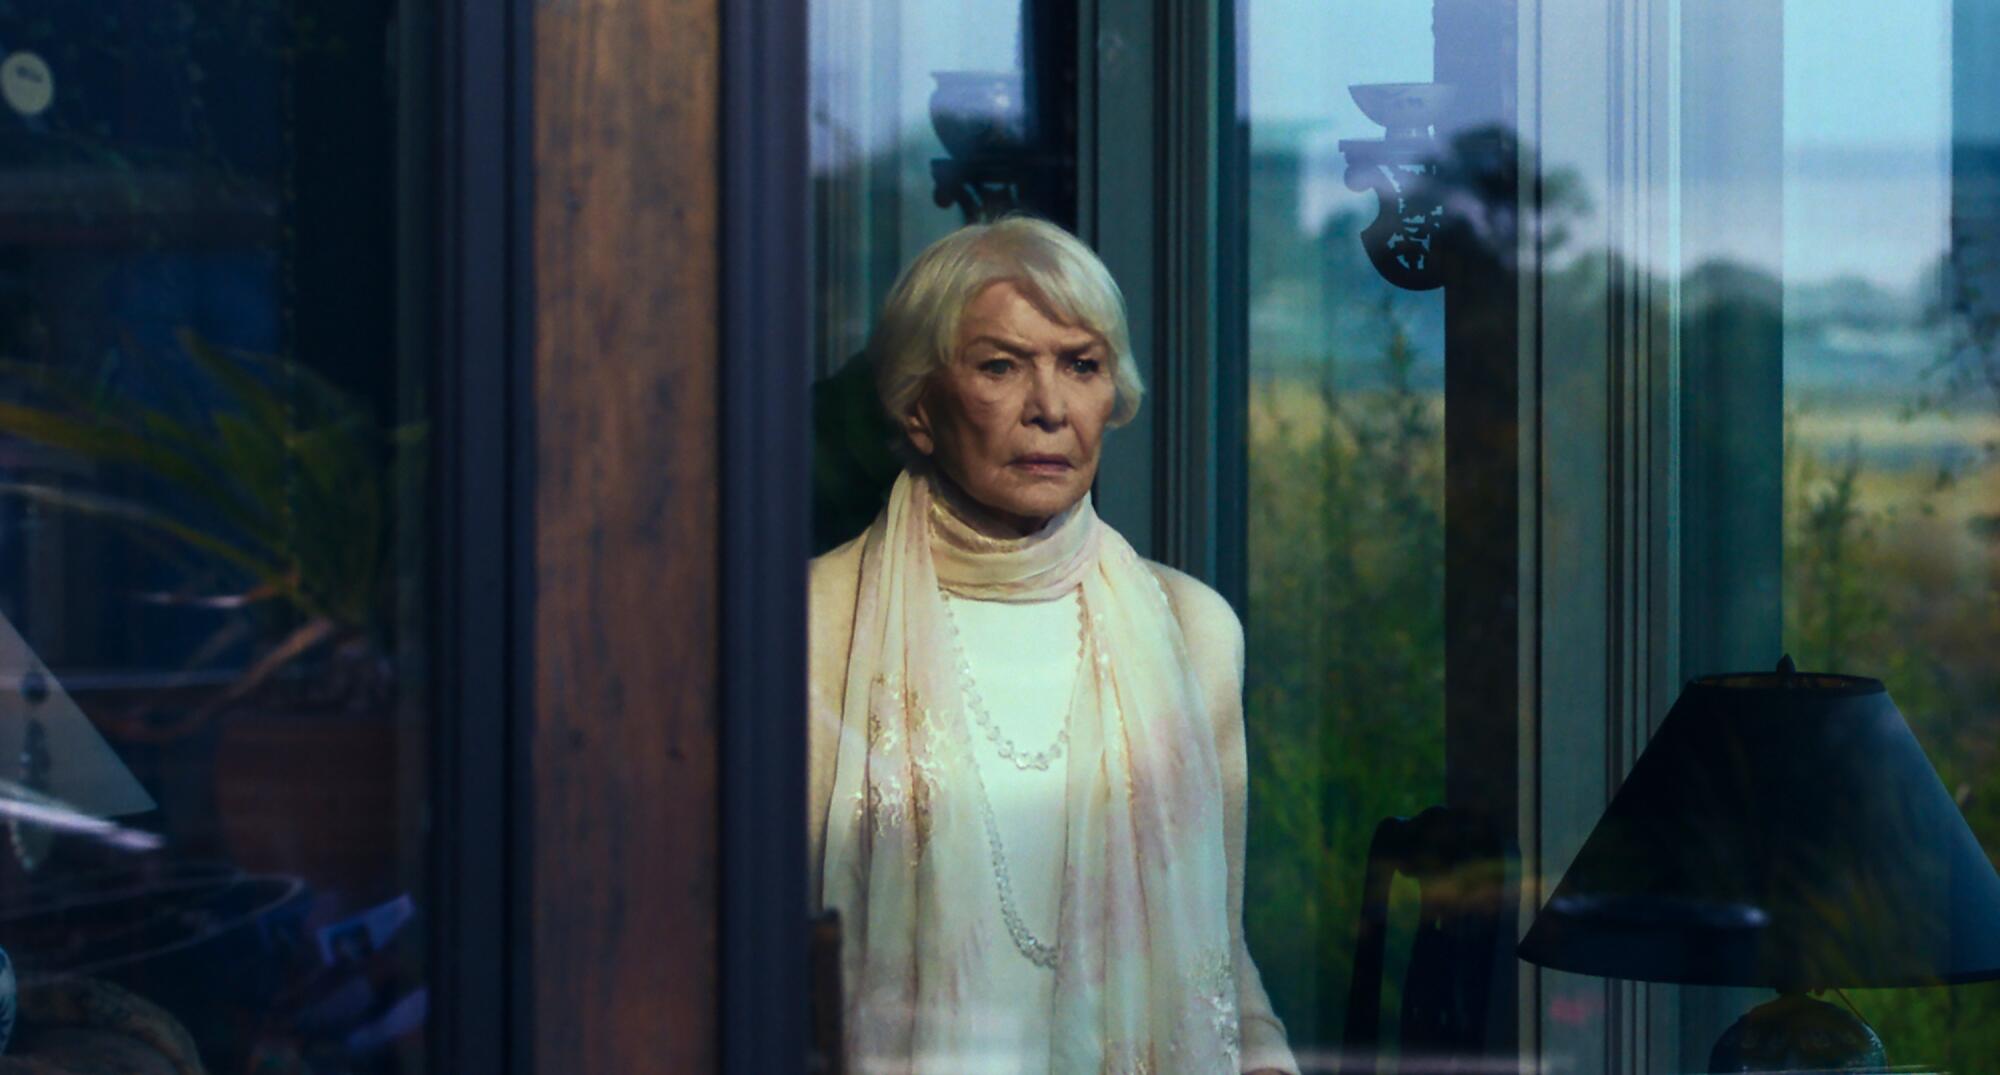 A graying, fearful woman stands at a window.